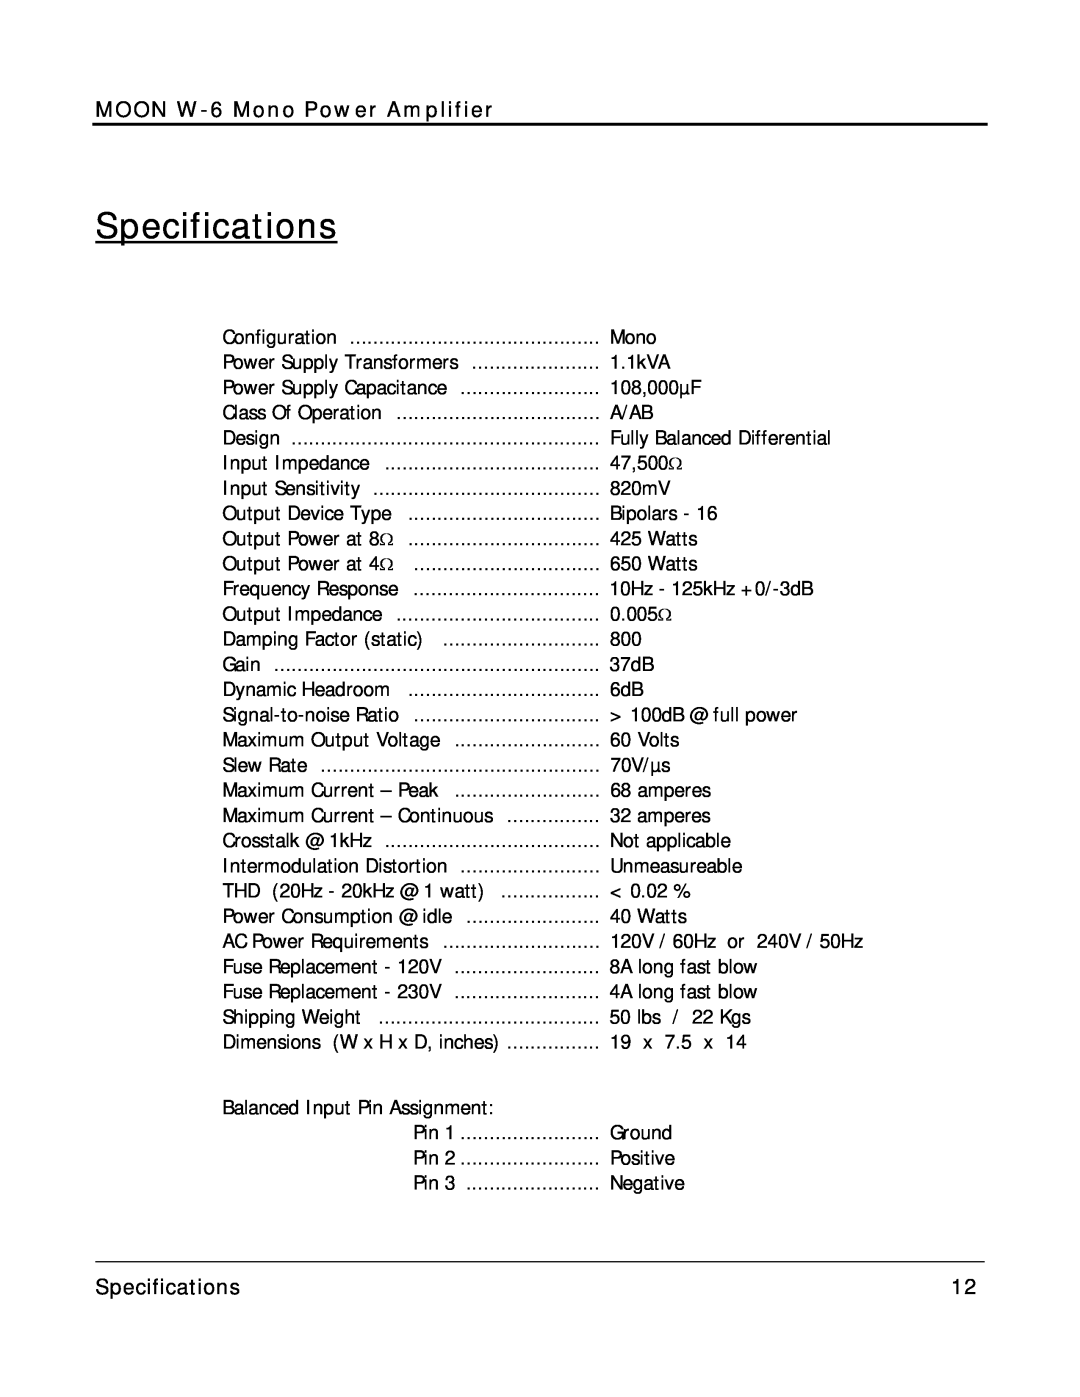 Simaudio owner manual Specifications, MOON W-6Mono Power Amplifier 